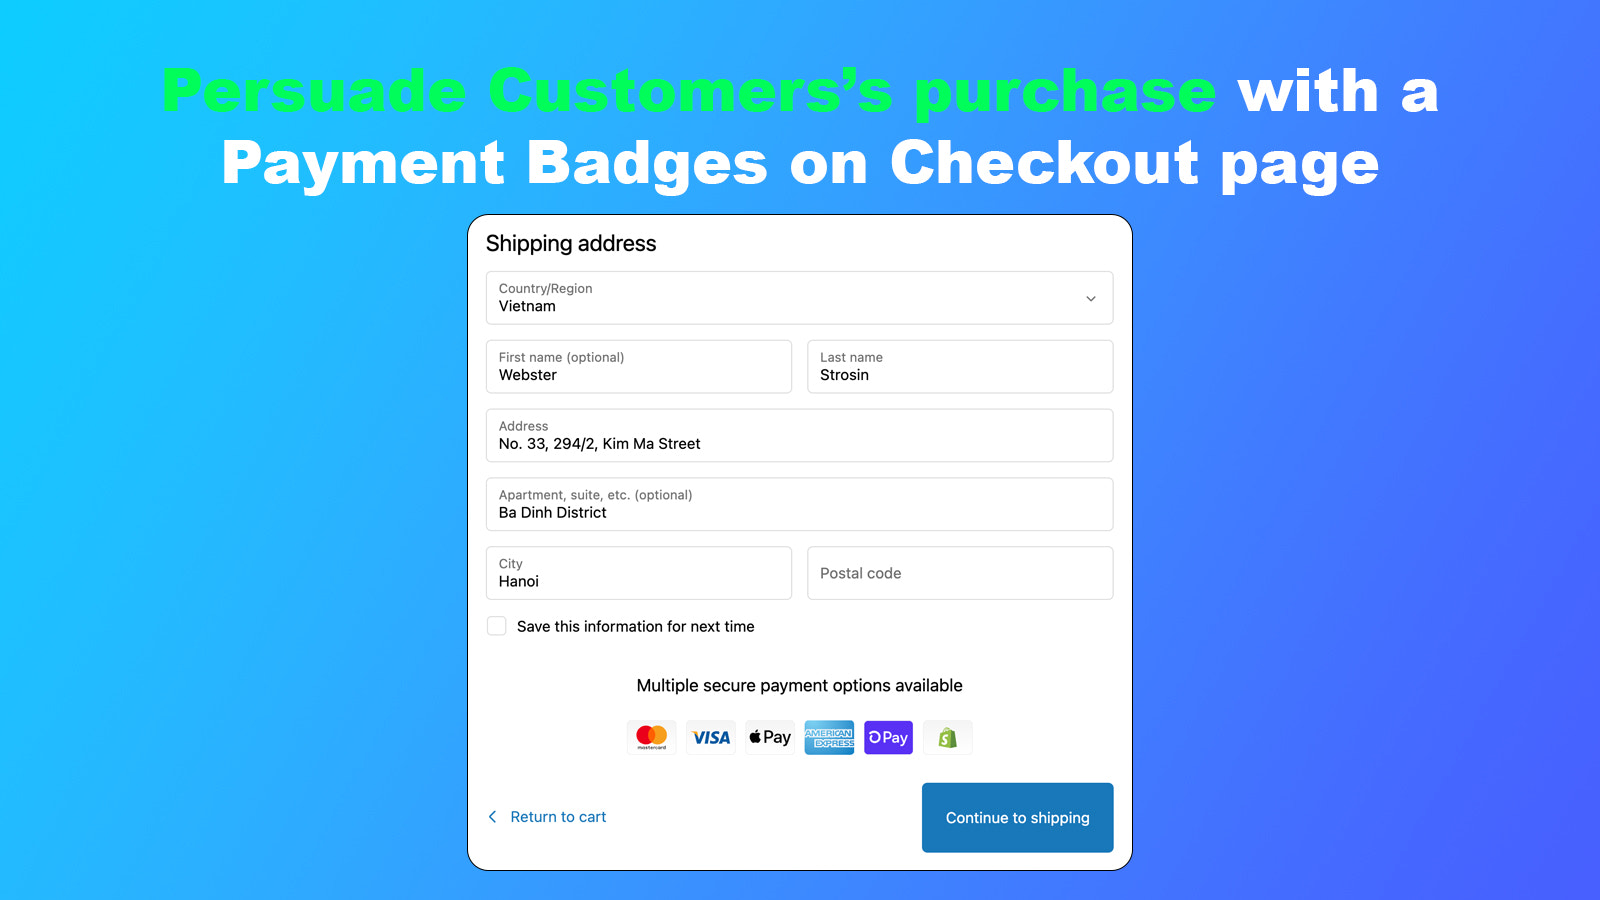 Payment badges on Checkout page